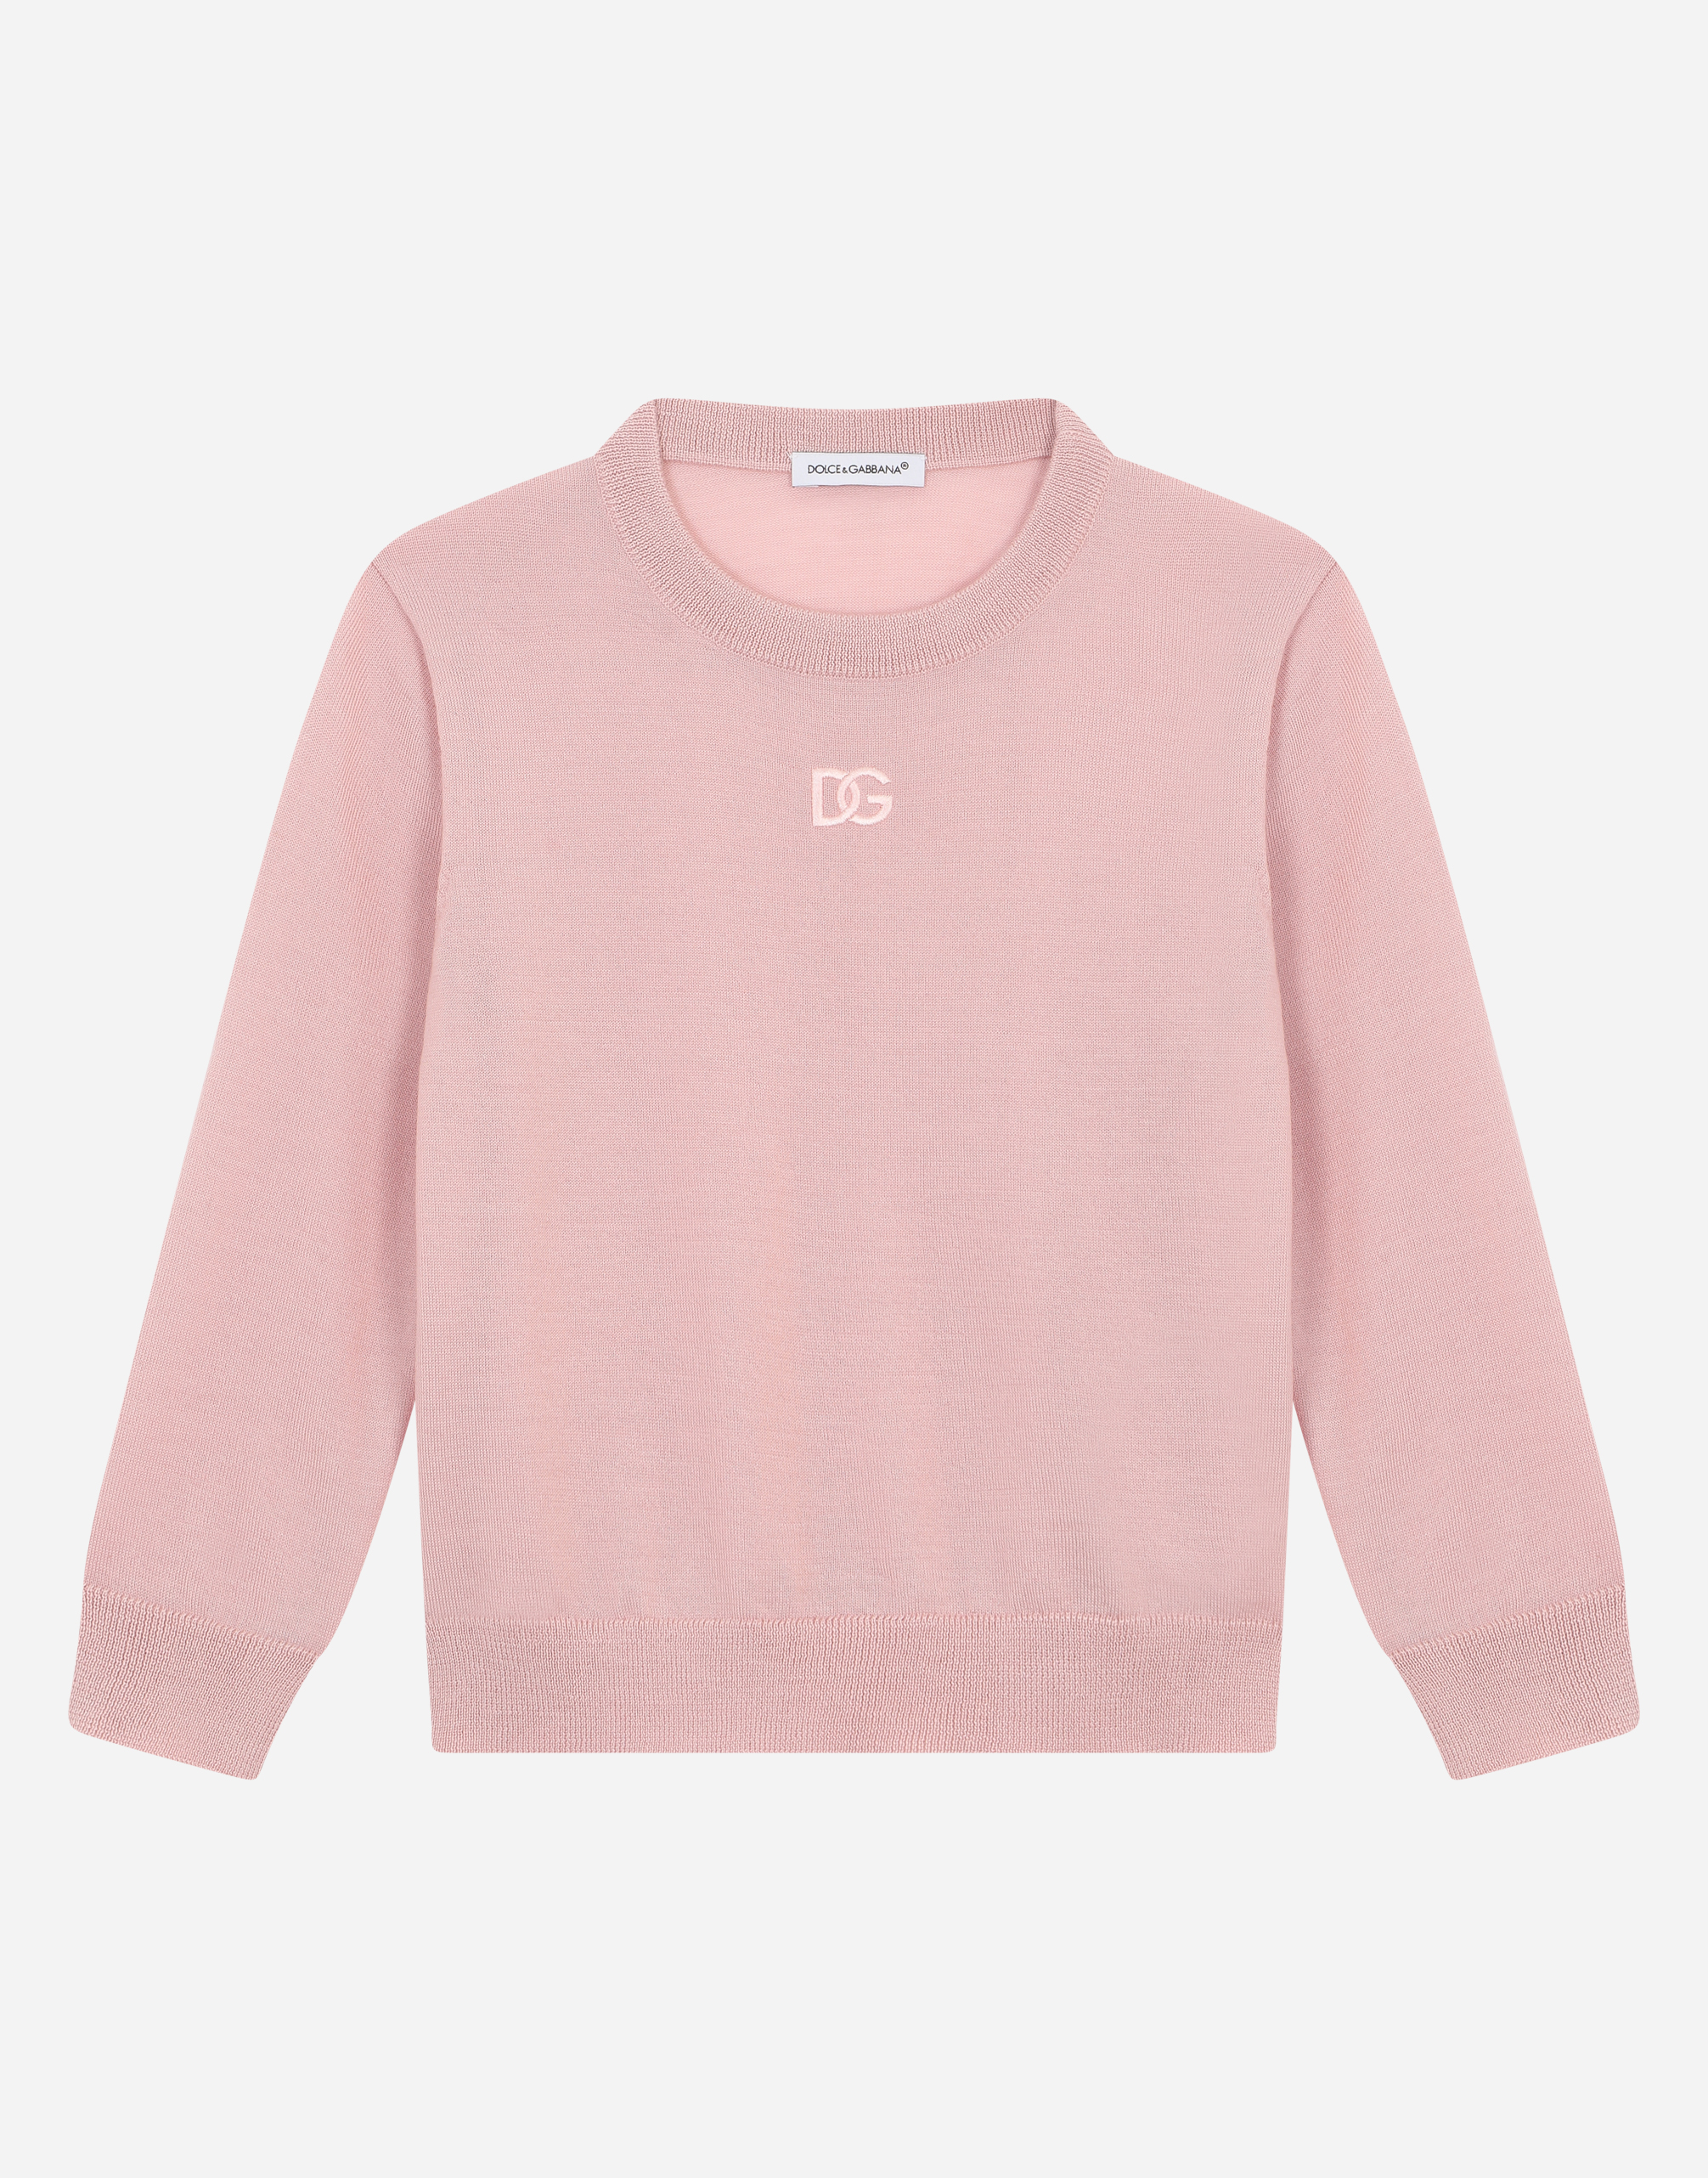 Cashmere round-neck sweater with DG logo embroidery in Pink